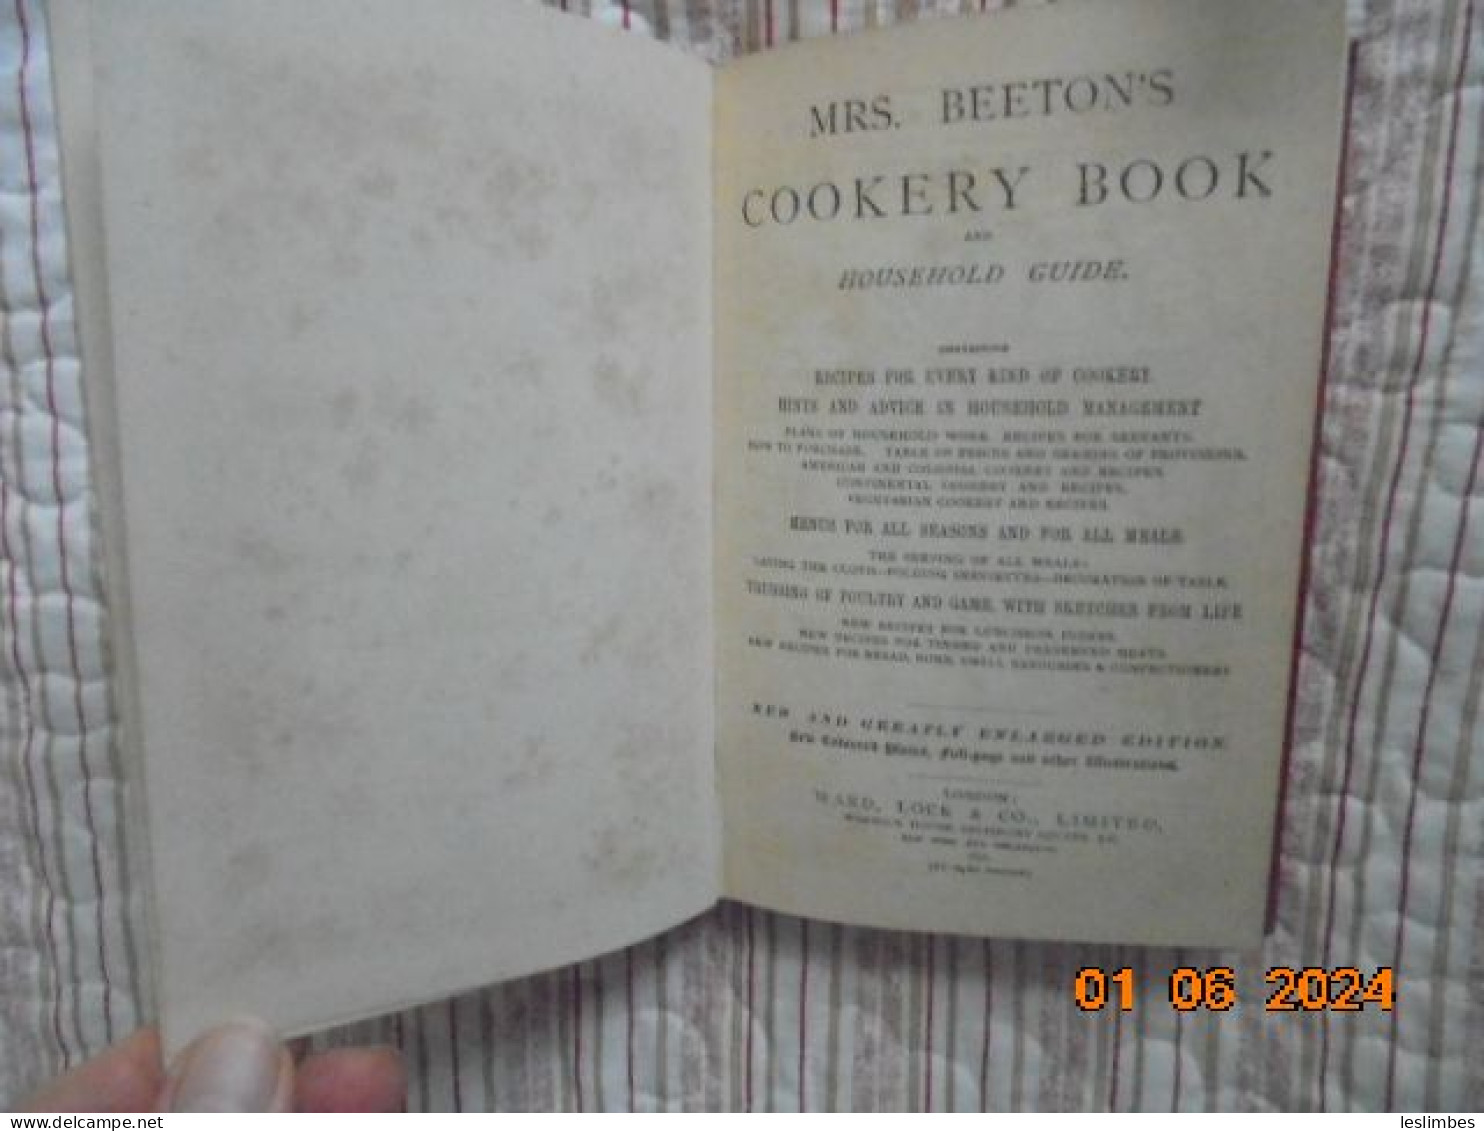 Mrs Beeton's Cookery Book And Household Guide. 1898 New & Enlarged Edition. 516 Columns, 1000 Receipts And Instructions - Basic, General Cooking